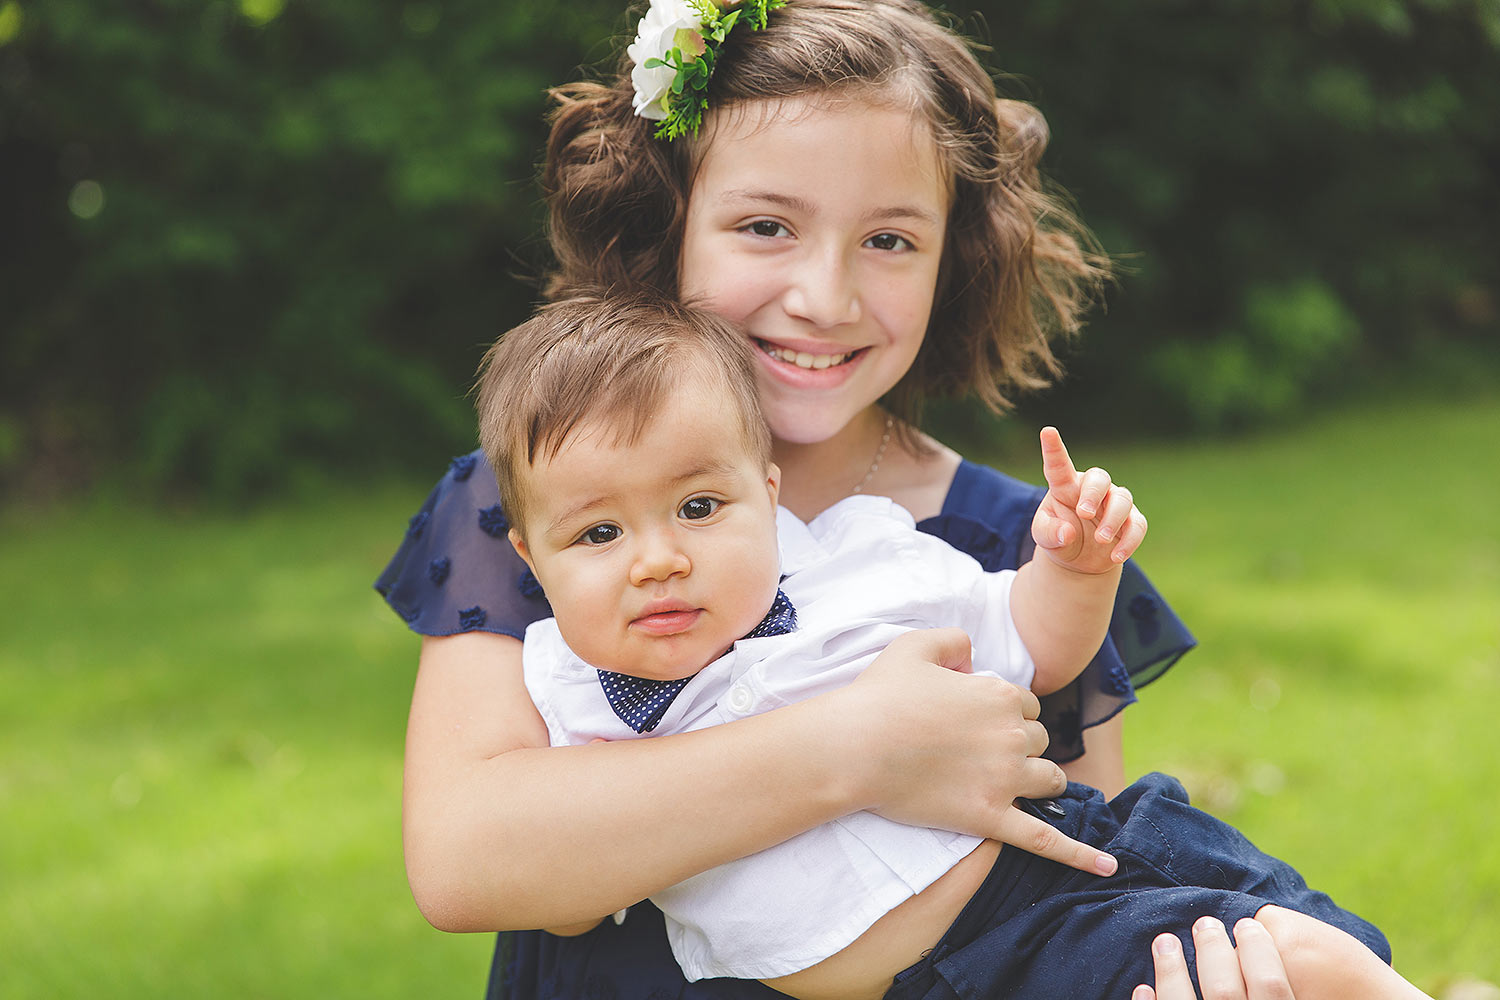 tween girl with light skin and dark hair, holding one year old baby brother with his hand up